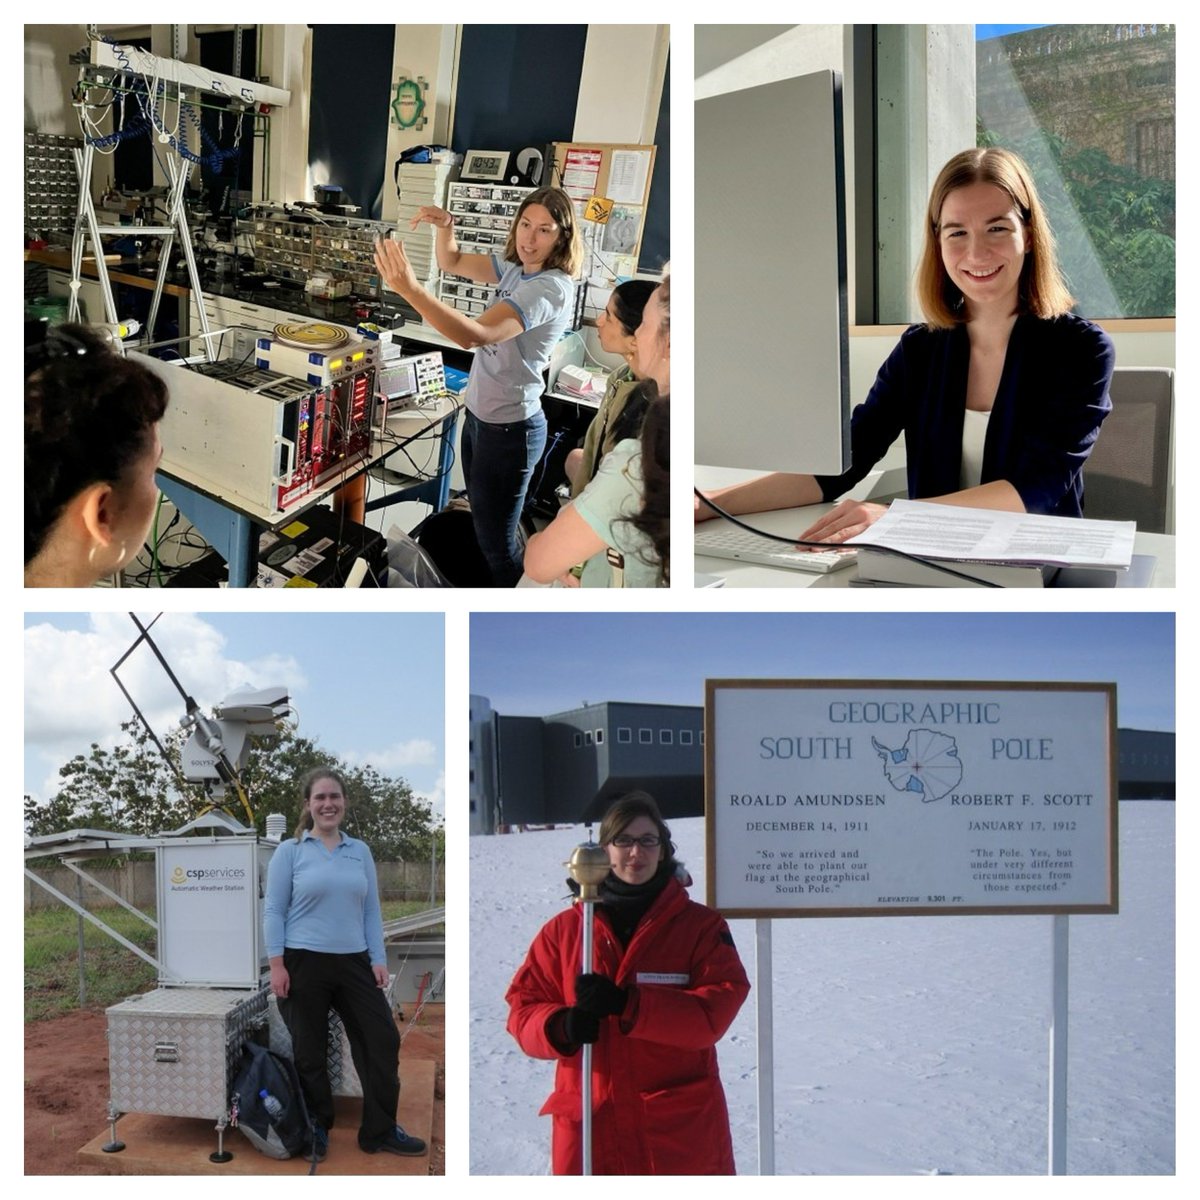 In Nov, I highlighted four #womeninphysics for my #PhysikerinderWoche project. Learn more about @paetsch_barbara @WeizmannScience, Anne cspservices, @Nora_S_Martin @BCNCollab @CRGenomica & Anna @ruhrunibochum & their research fields! @BMBF_Bund 👩‍💻👉 dpg-physik.de/vereinigungen/…